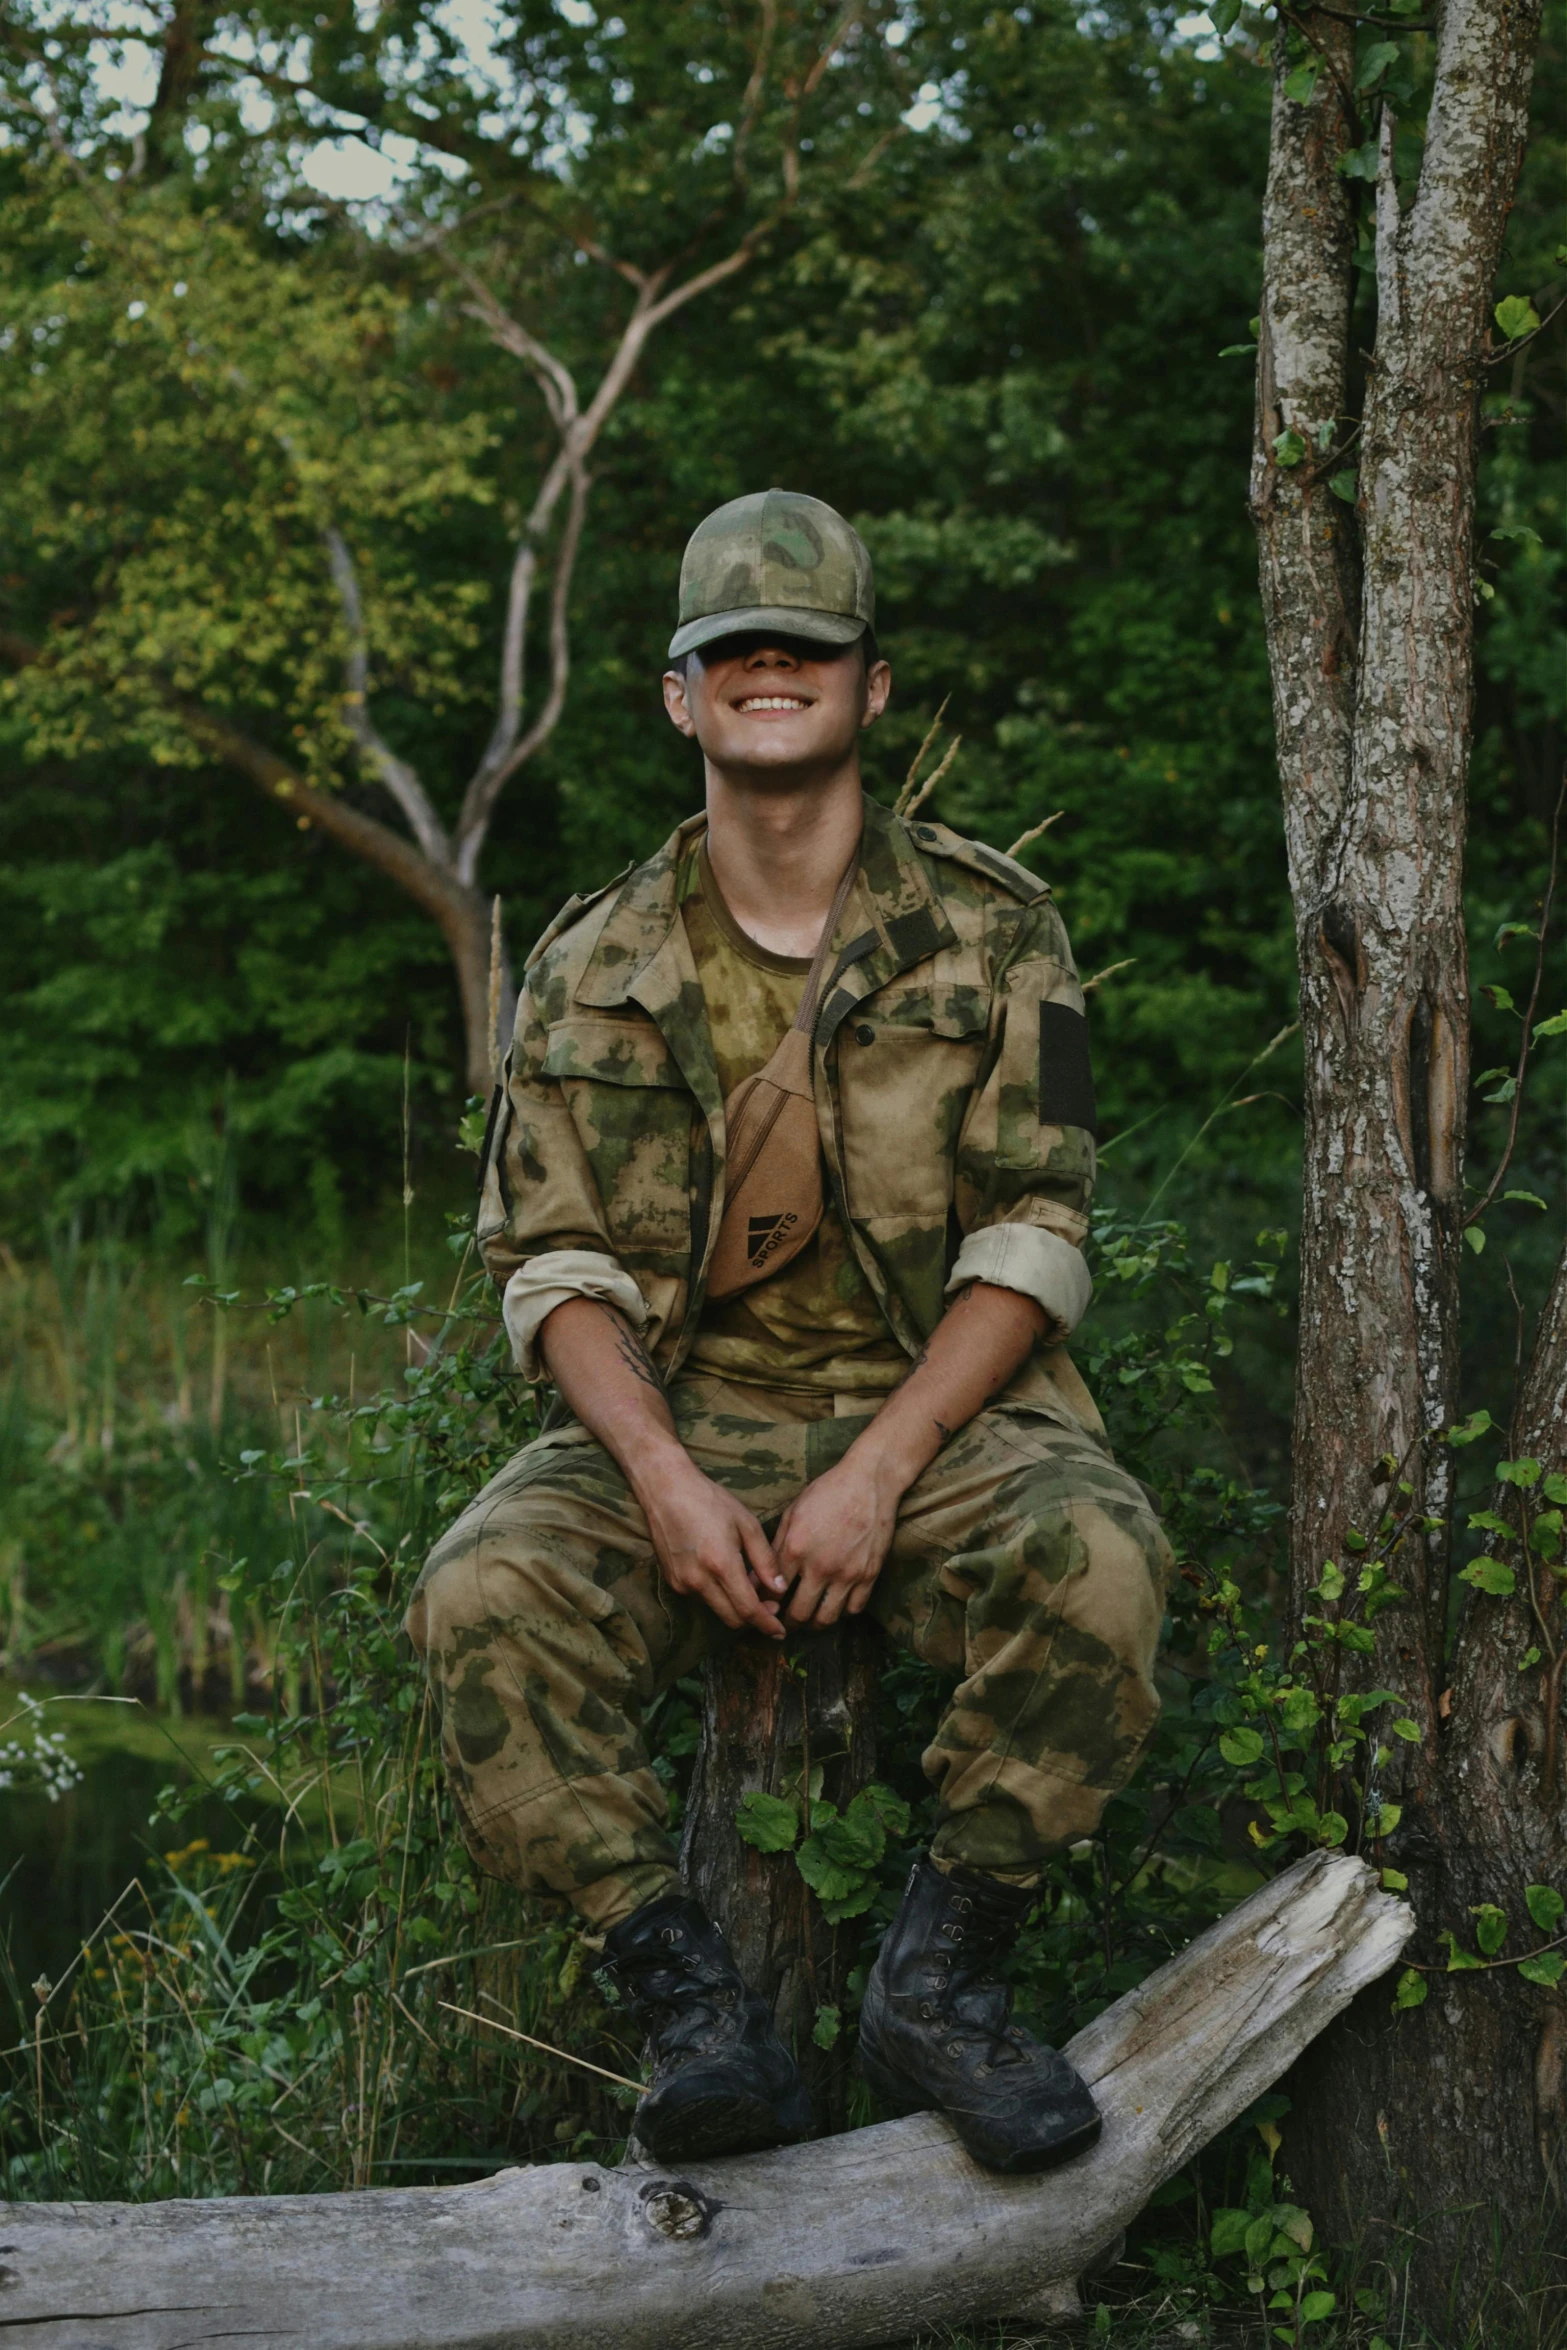 man in military outfit sitting on a log posing